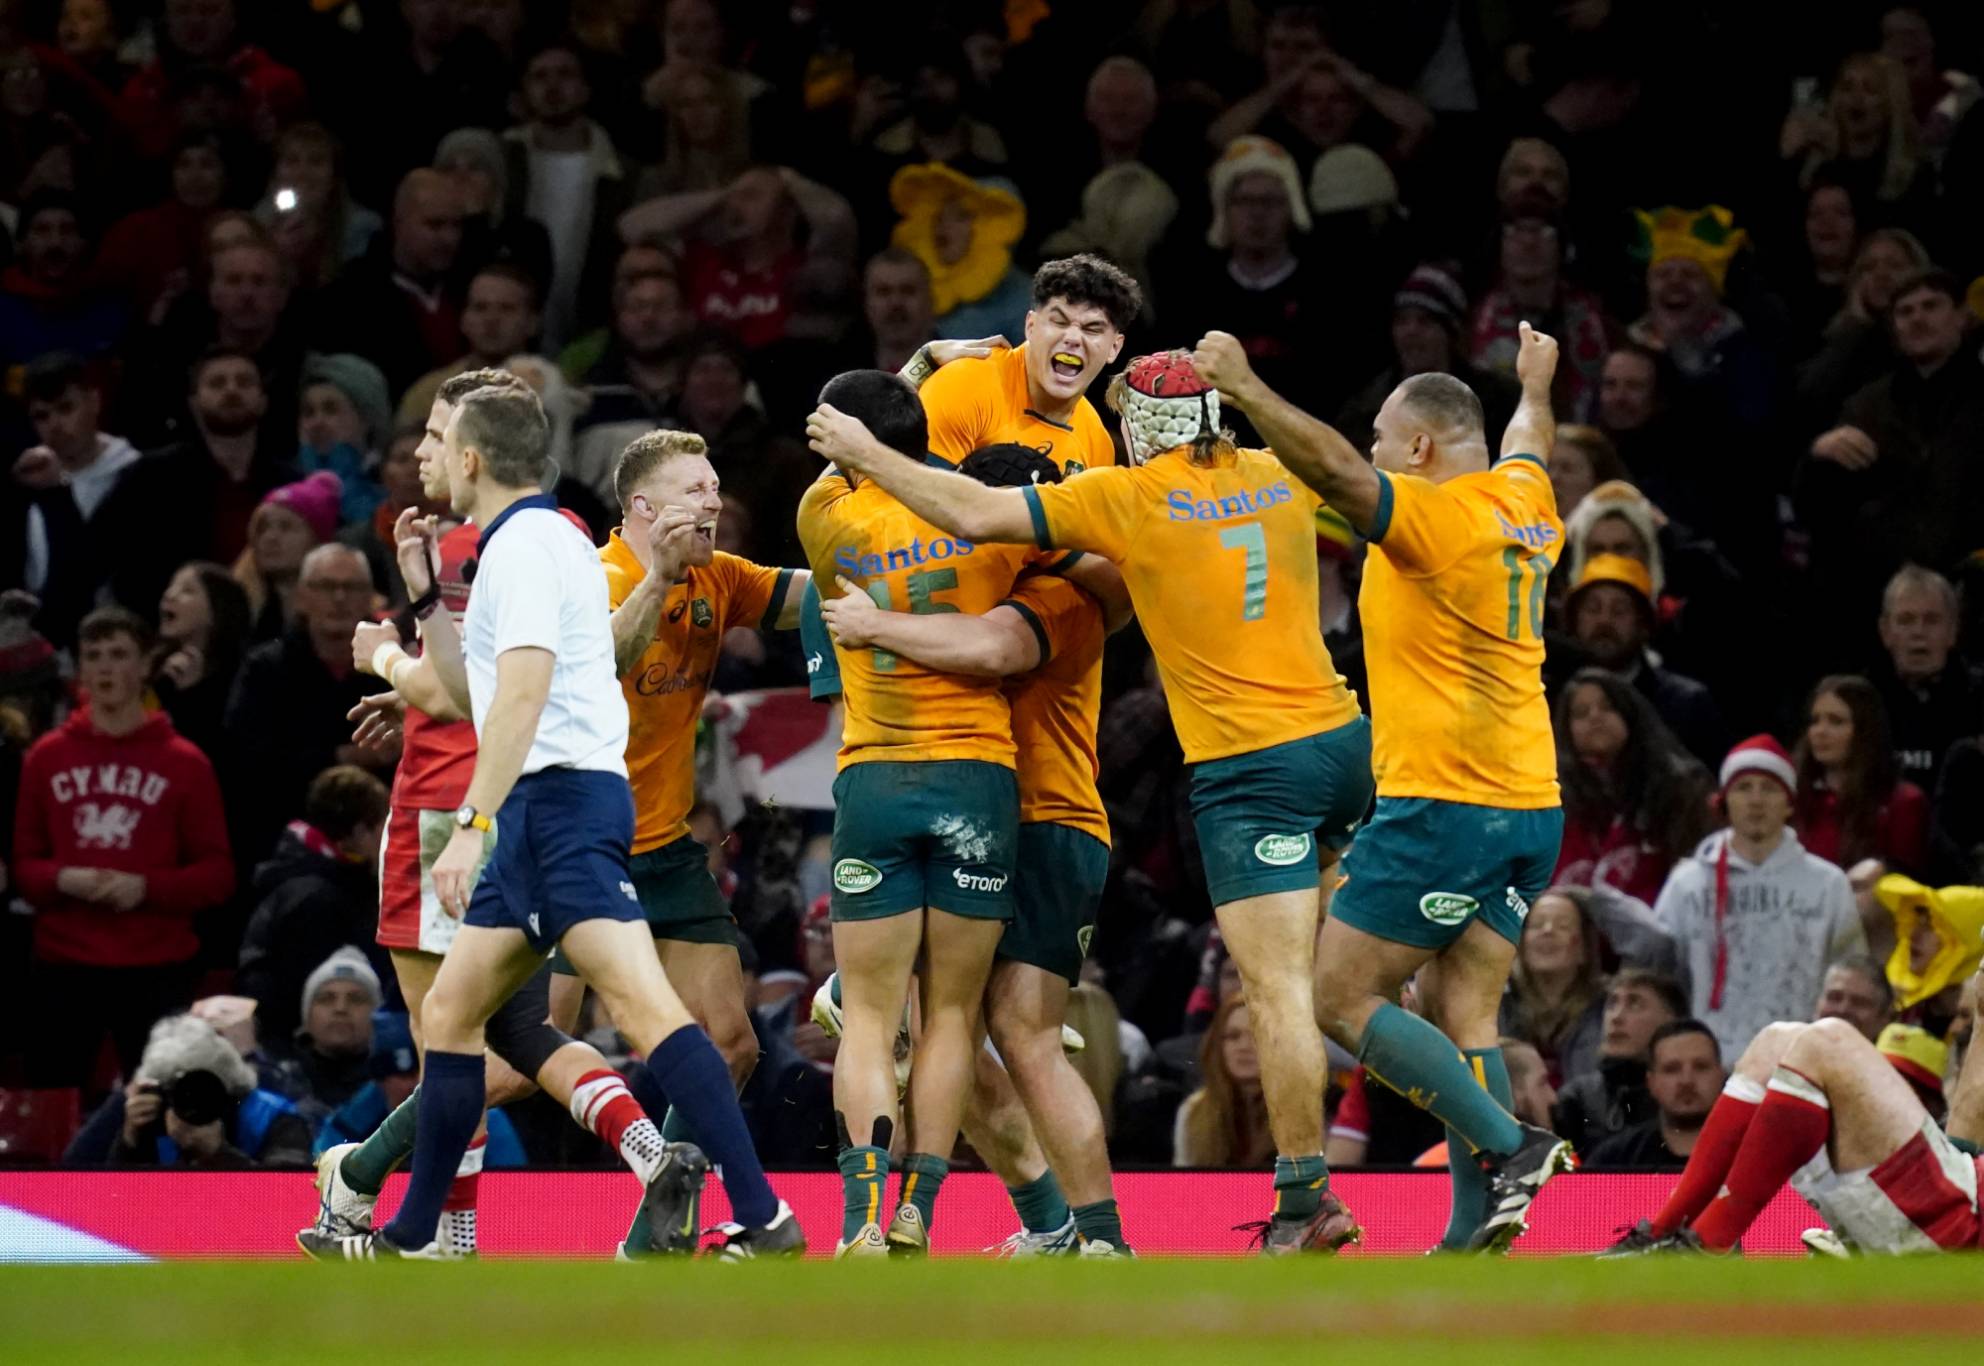 Australia players celebrate at the final whistle after the Autumn International match at Principality Stadium, Cardiff. Picture date: Saturday November 26, 2022. (Photo by David Davies/PA Images via Getty Images)